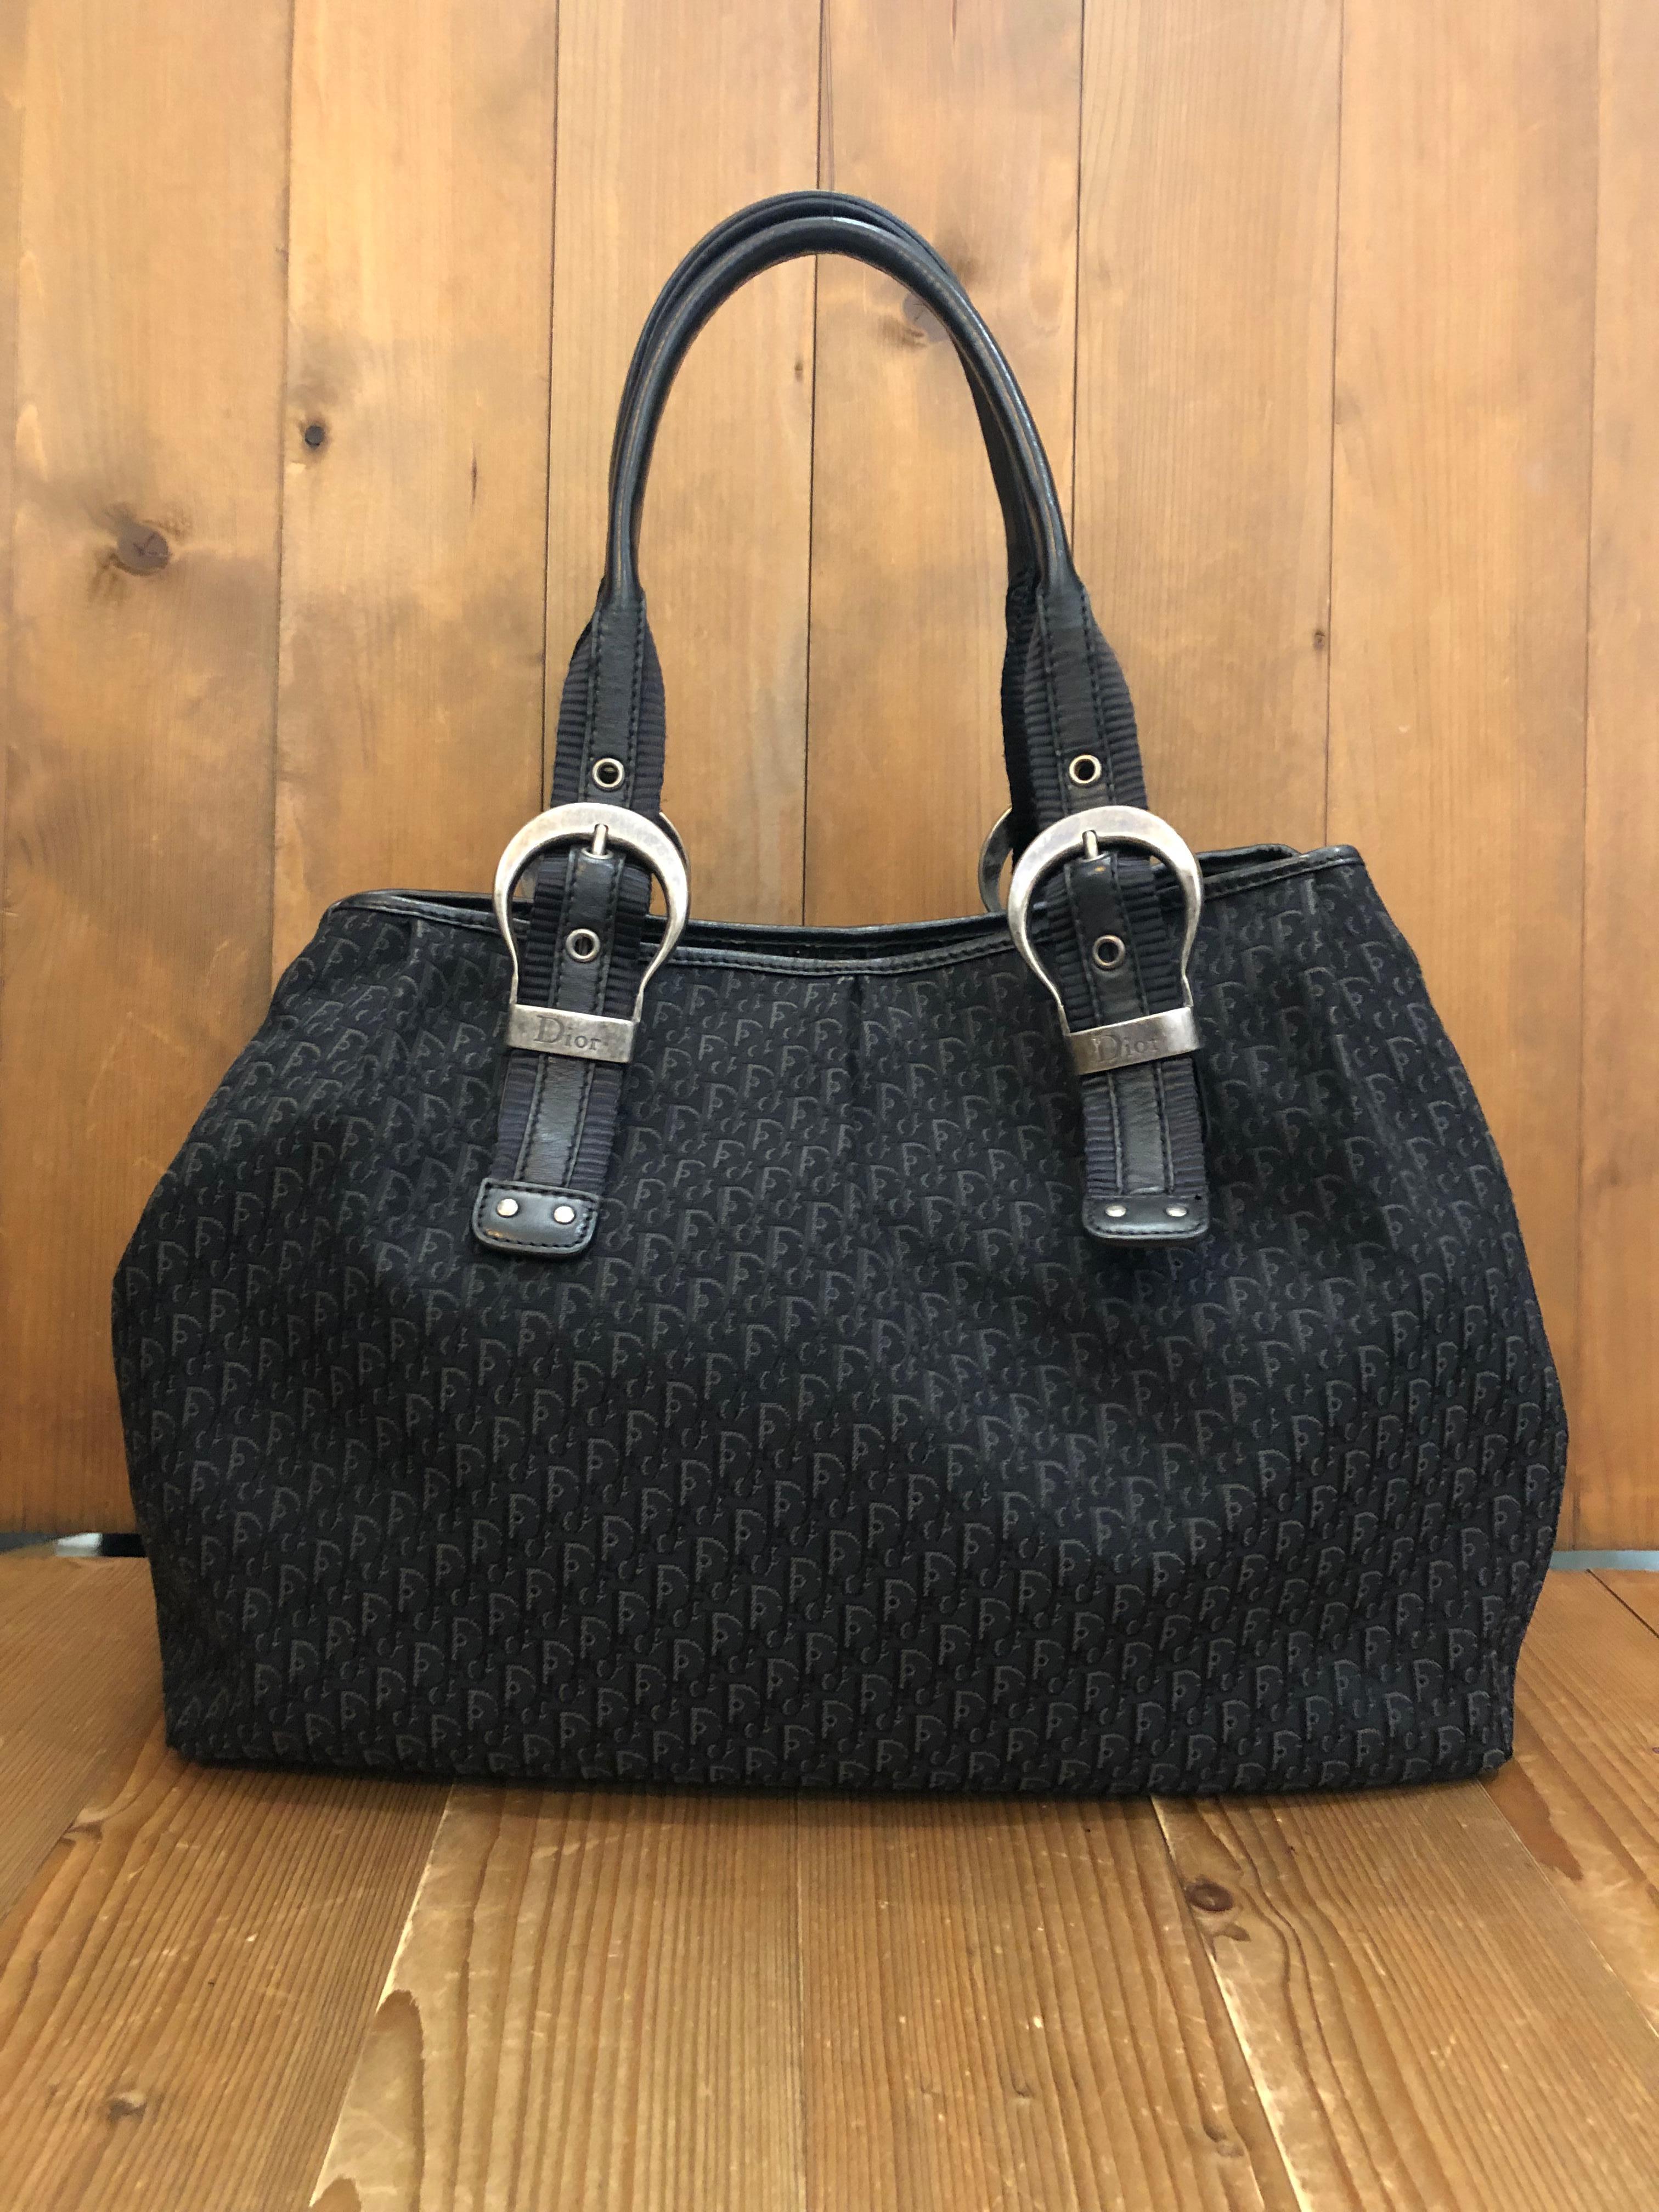 2007 Christian Dior shoulder bag in black trotter jacquard featuring double wide handles for comfort on your shoulder. Interior has one interior zip pocket to keep your belongings secured. Magnetic snap closure. Made in Italy. This bag is ideal for